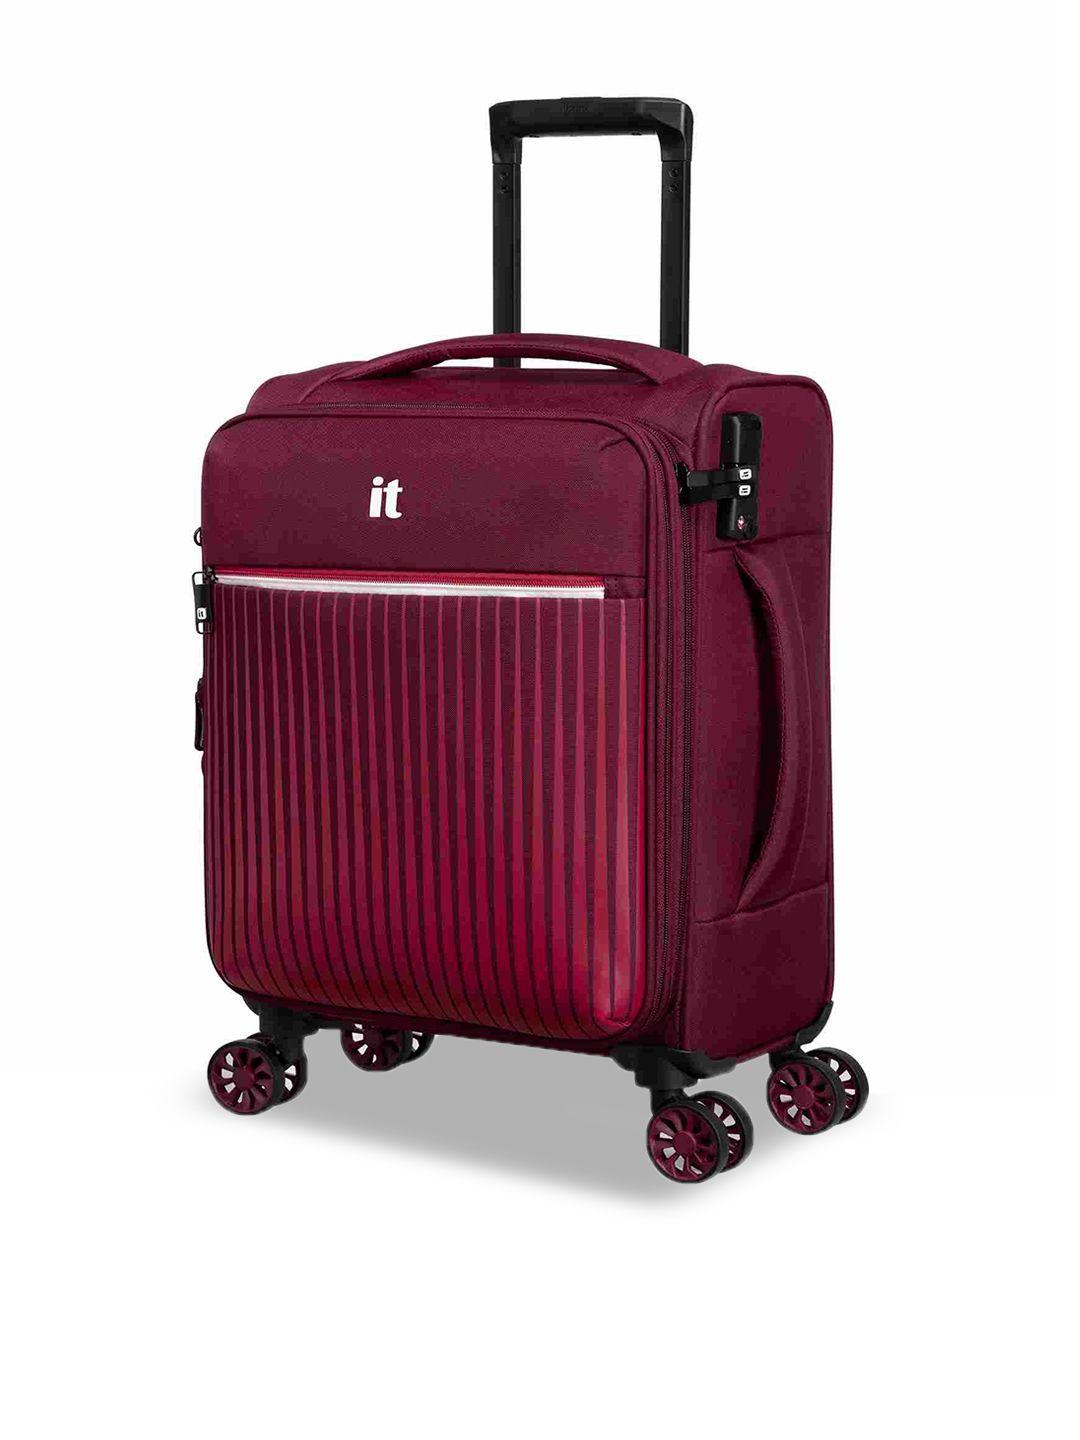 it luggage striped soft-sided small 360-degree rotation trolley suitcase